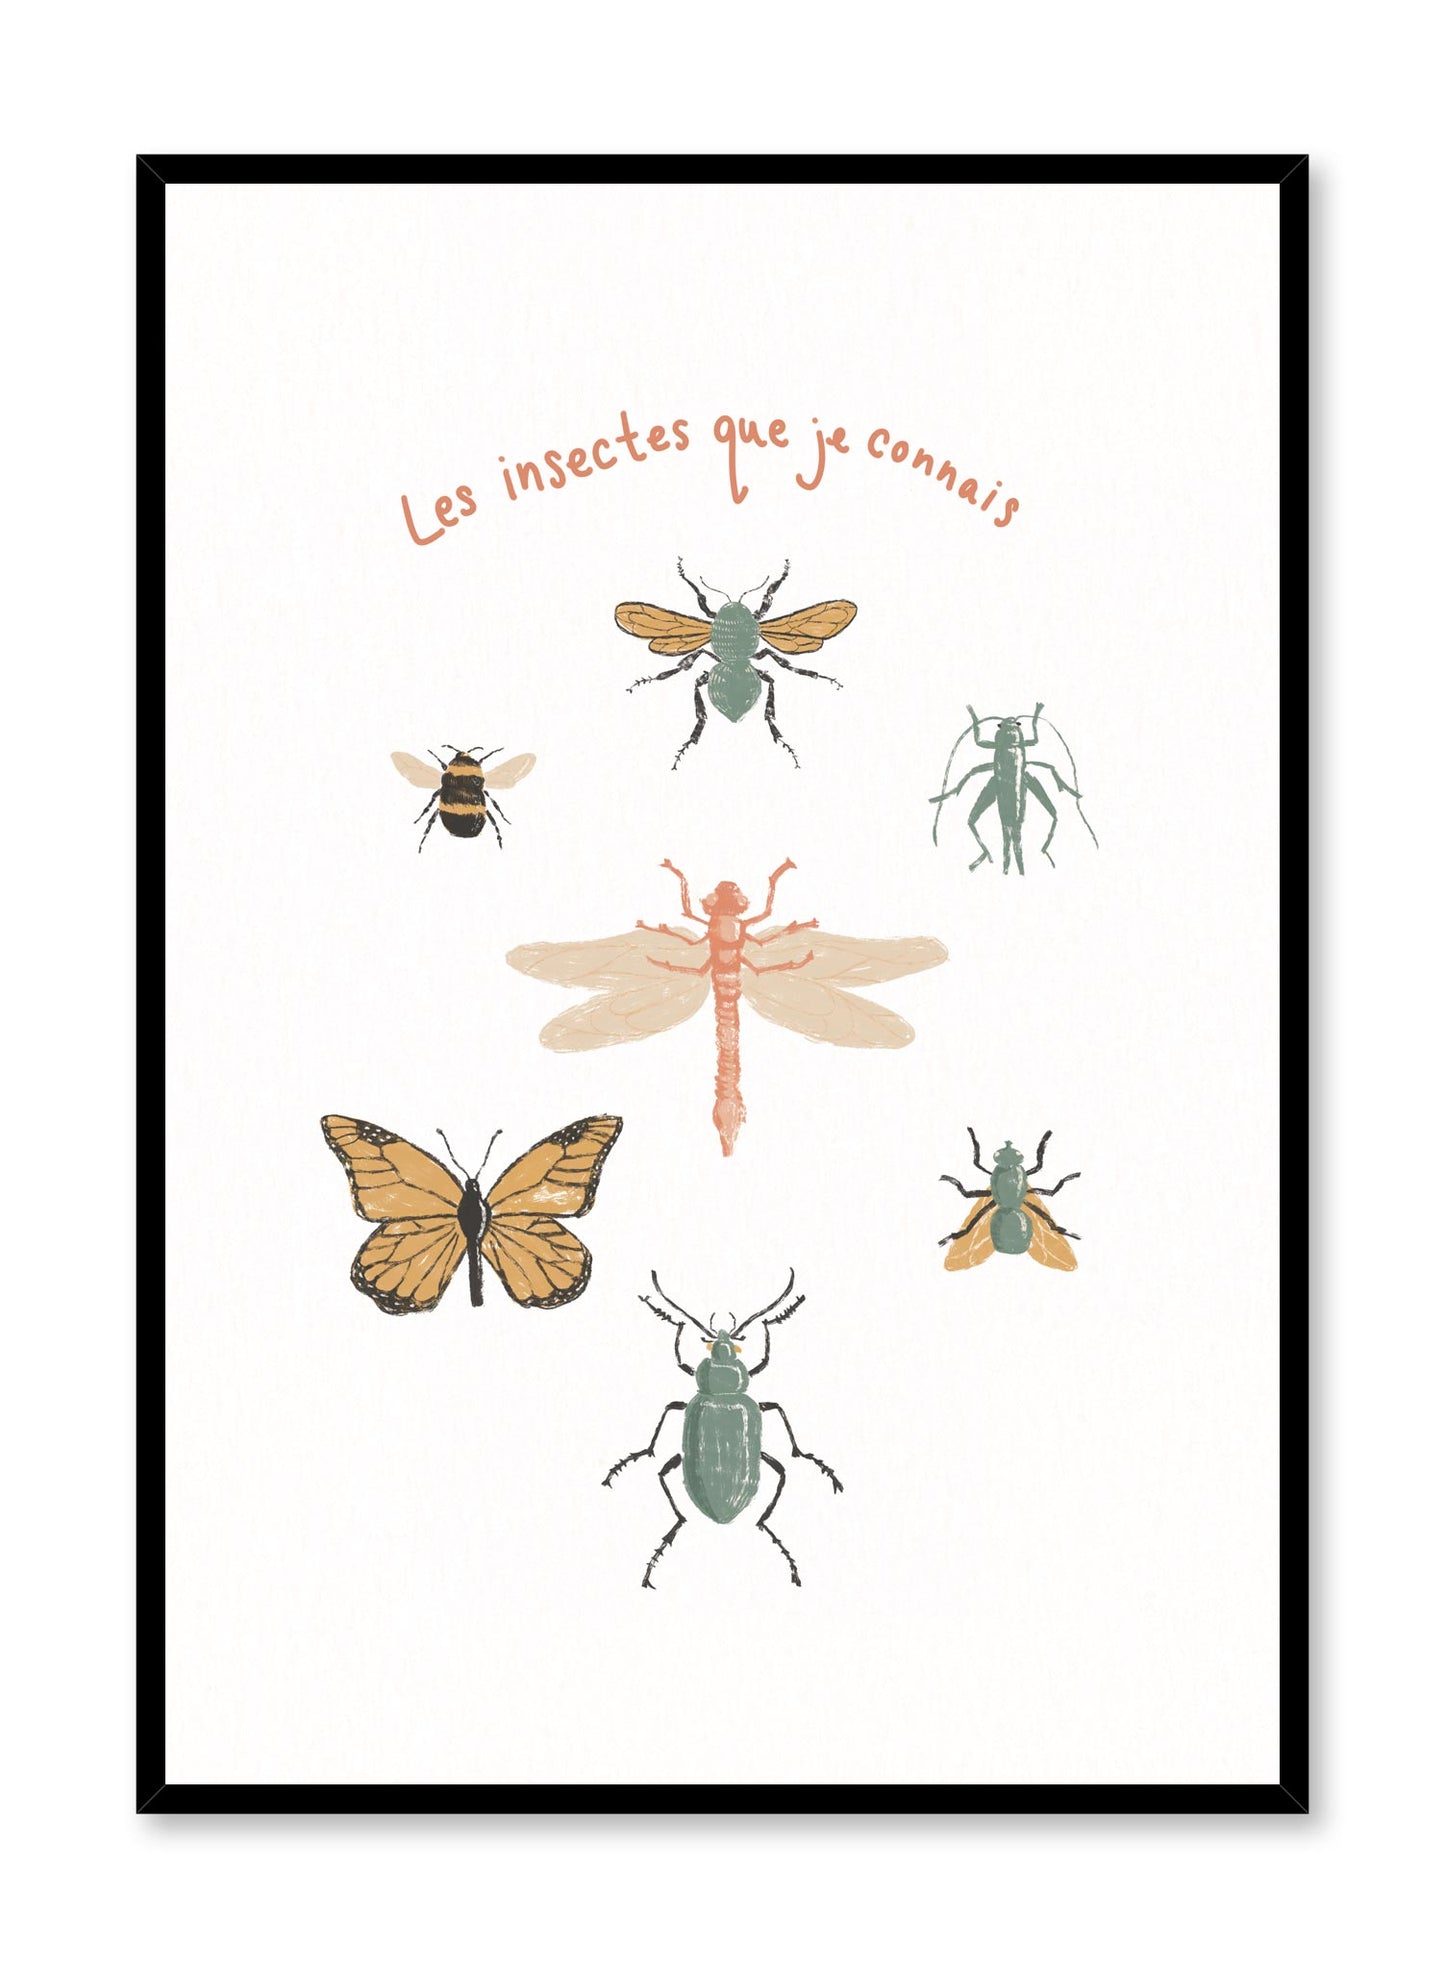 Bug’s Life in French is a minimalist illustration by Opposite Wall of seven different types of commonly found bugs.